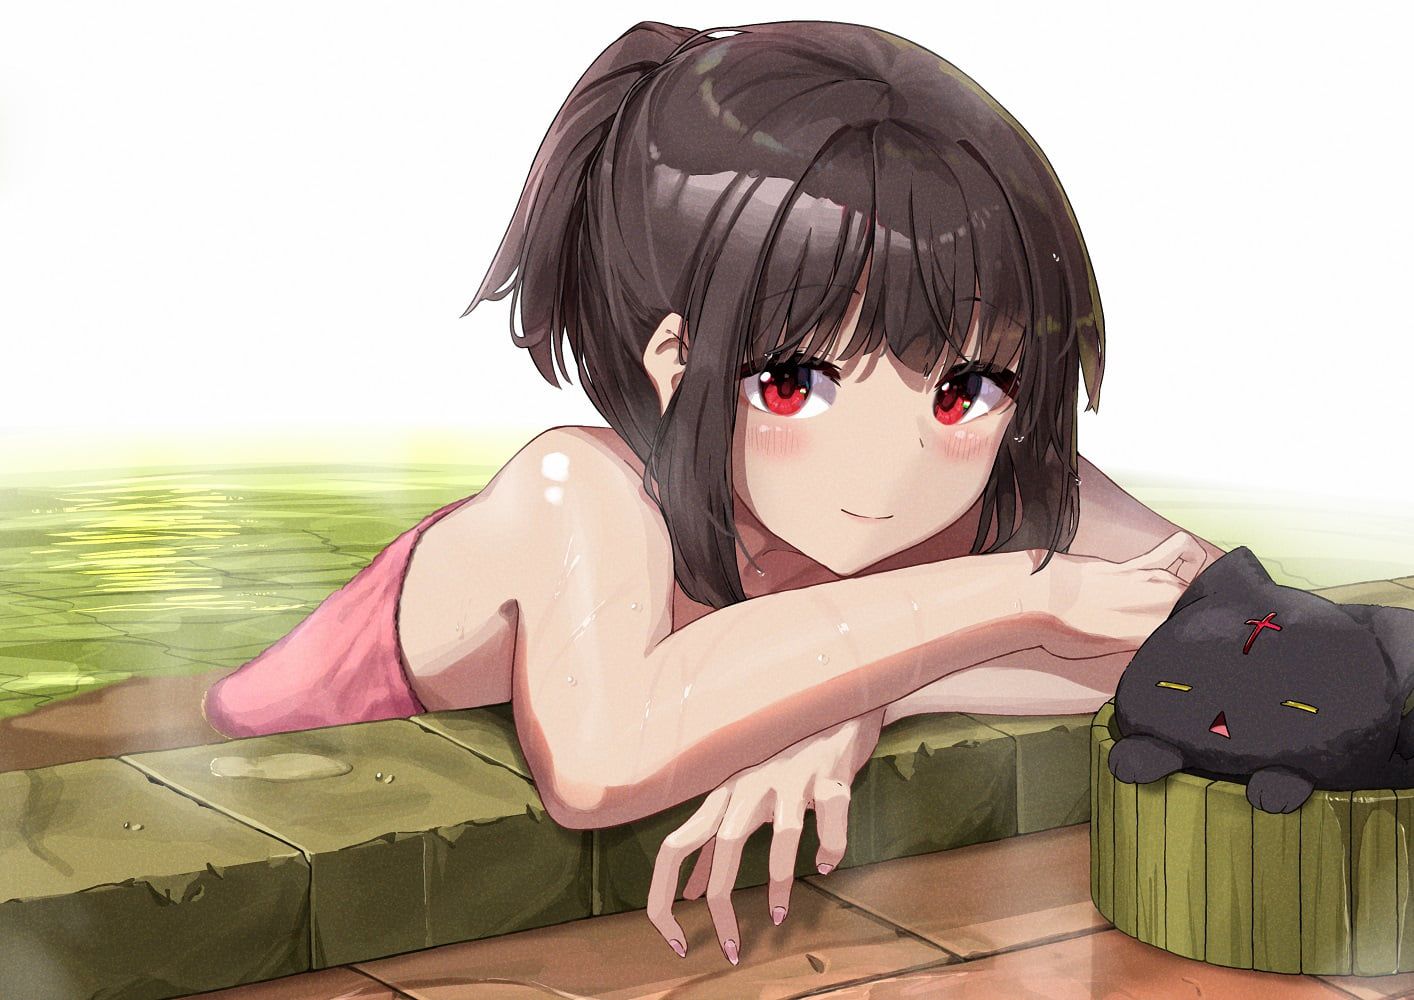 It's a bath, so it's natural to relax naked! It's not ecchi! 29